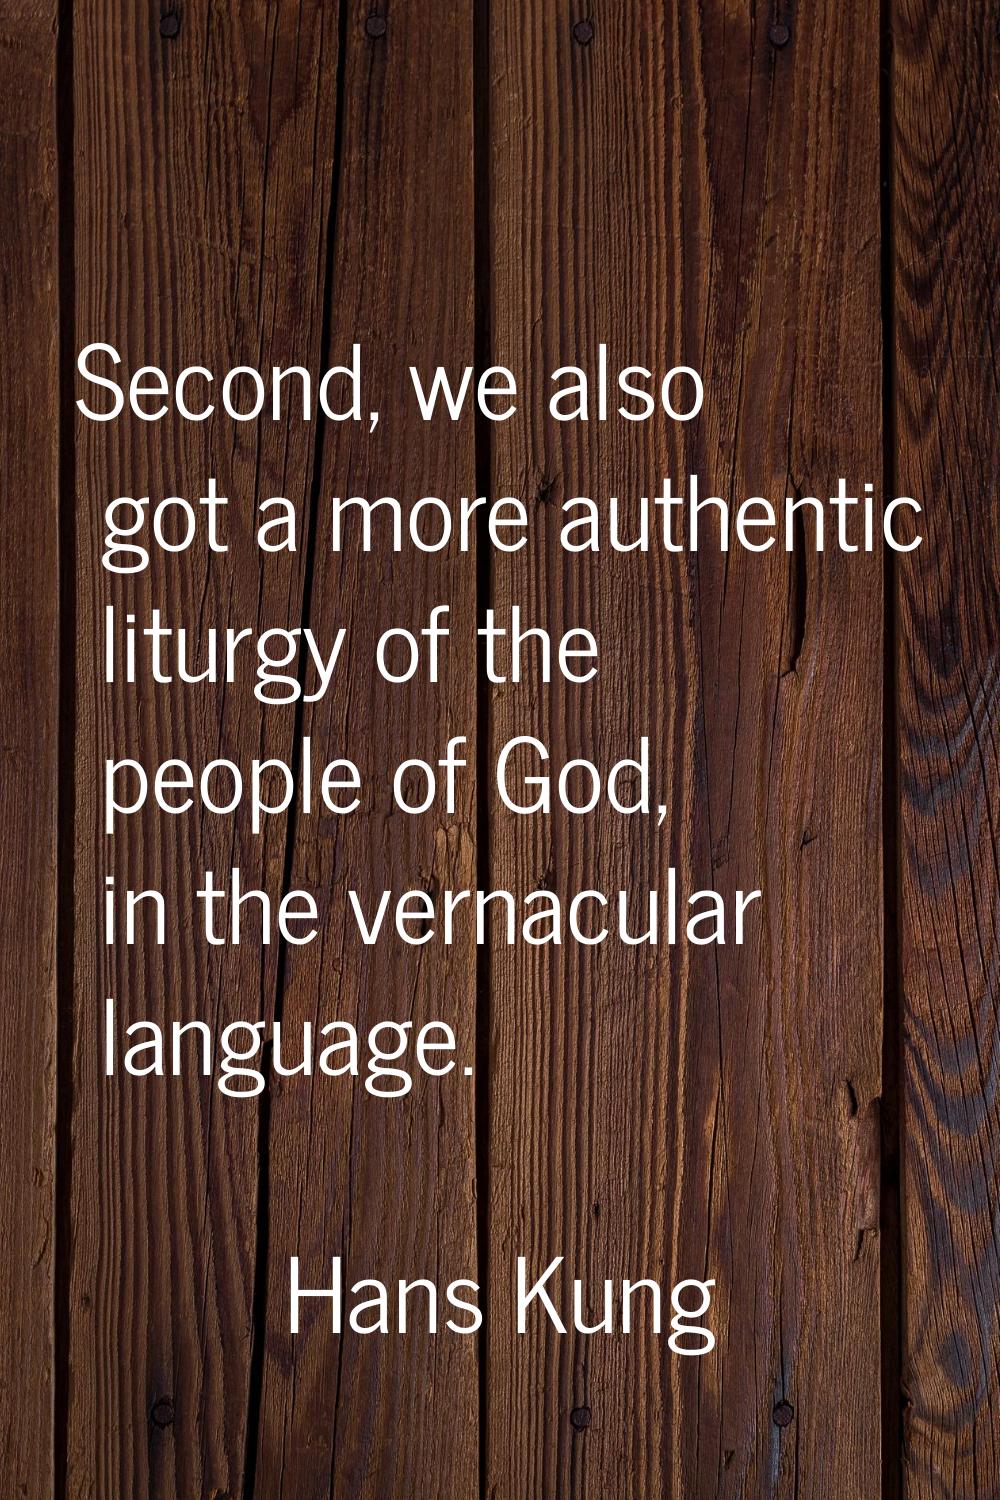 Second, we also got a more authentic liturgy of the people of God, in the vernacular language.